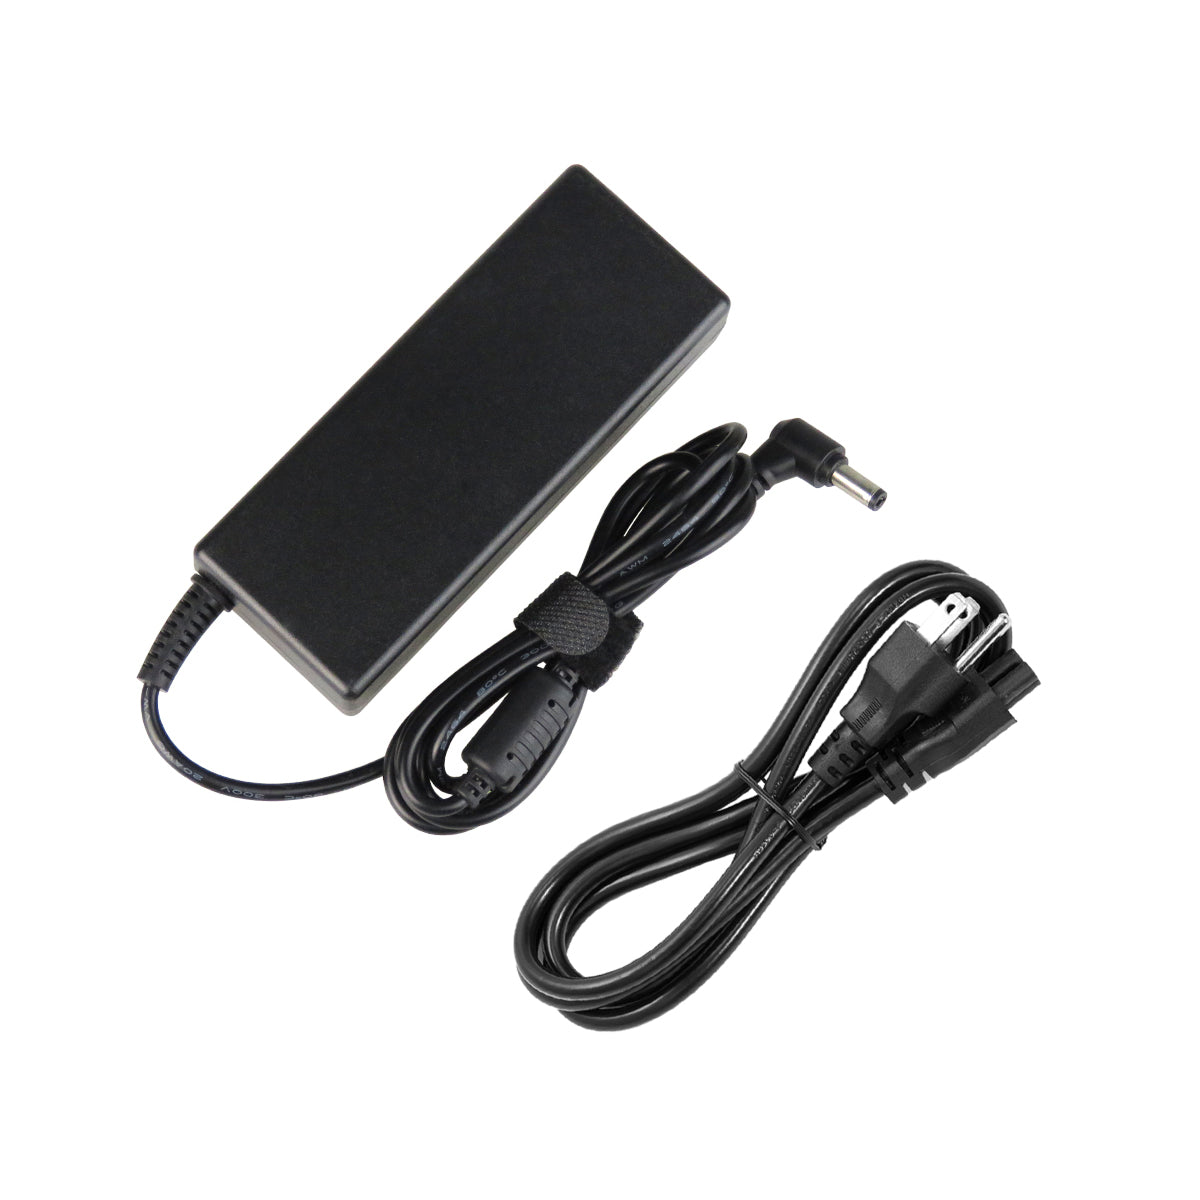 AC Adapter Charger for ASUS F83 Notebook.